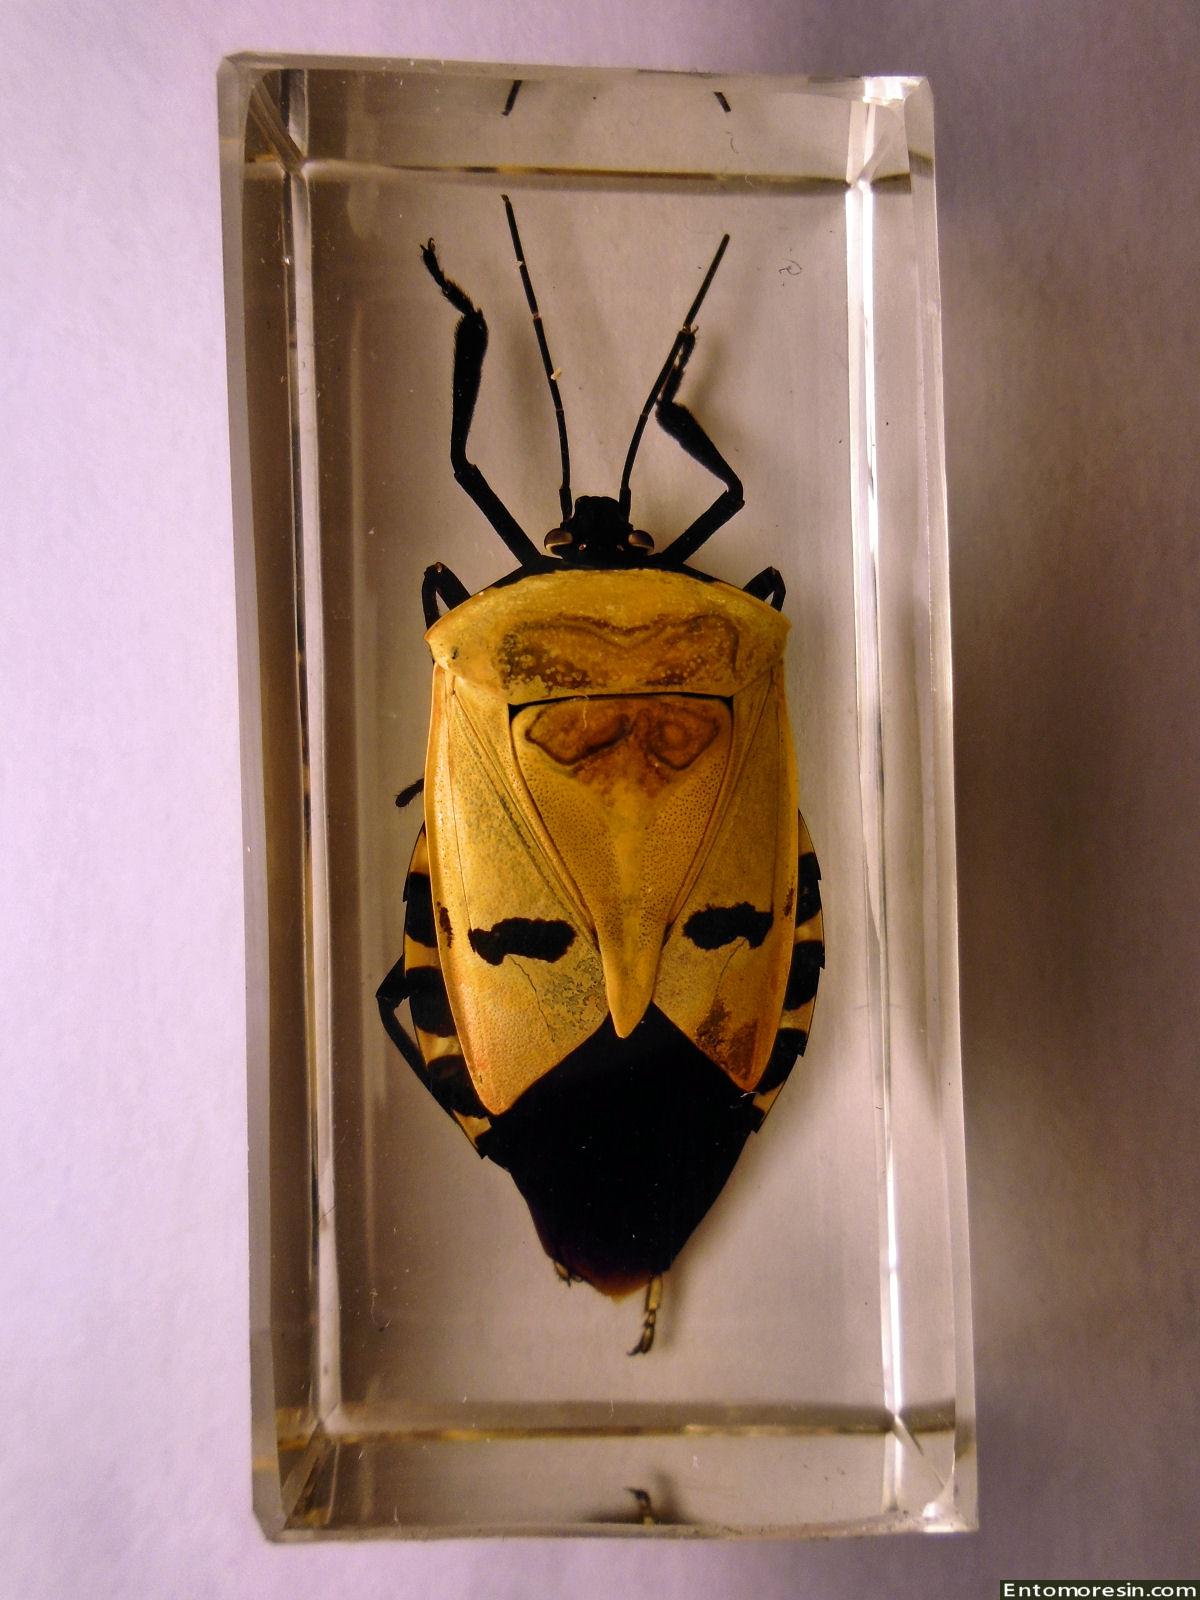 INSECTS & ANIMALS TAXIDERMY - RESIN ENCAPSULATION